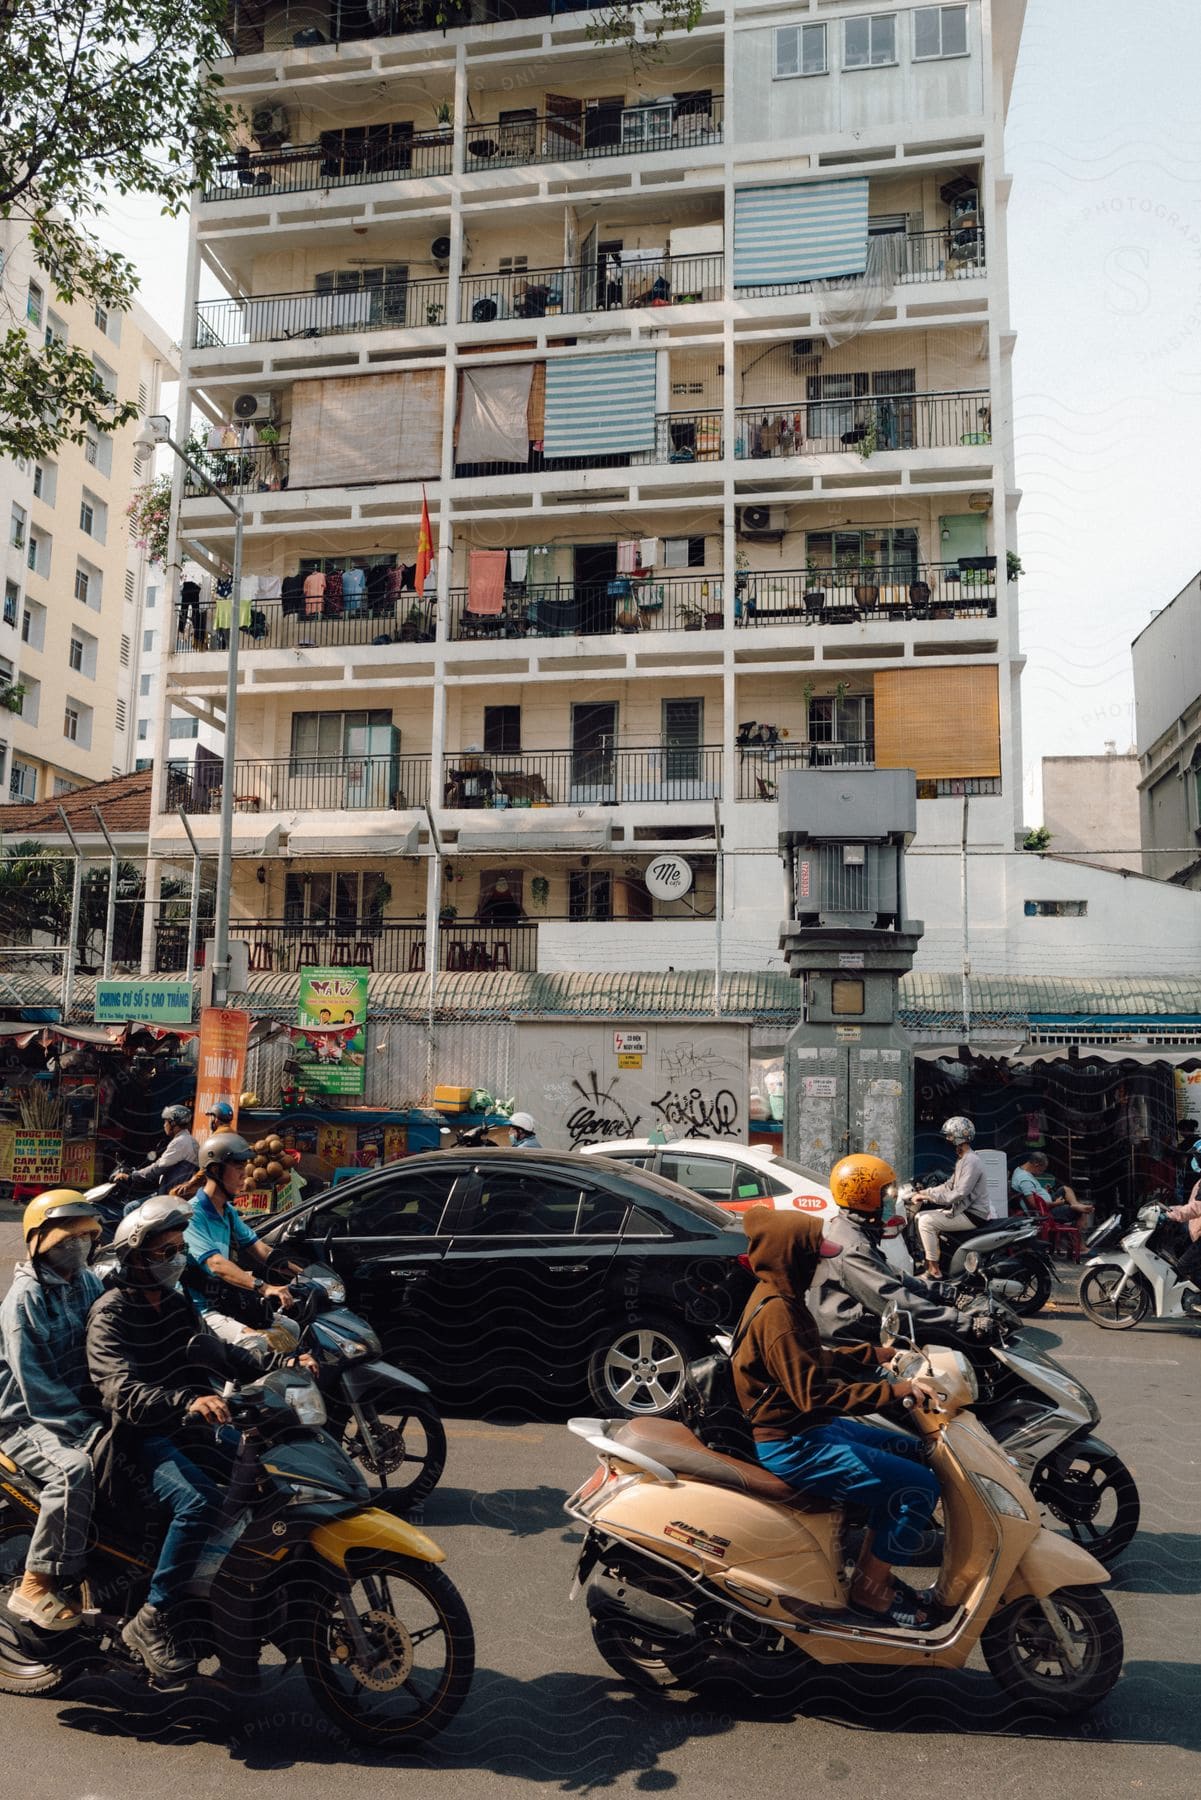 Several people riding motorbikes on a street and behind there are some cars and there is a huge building with clothes hanging on balconies in the background